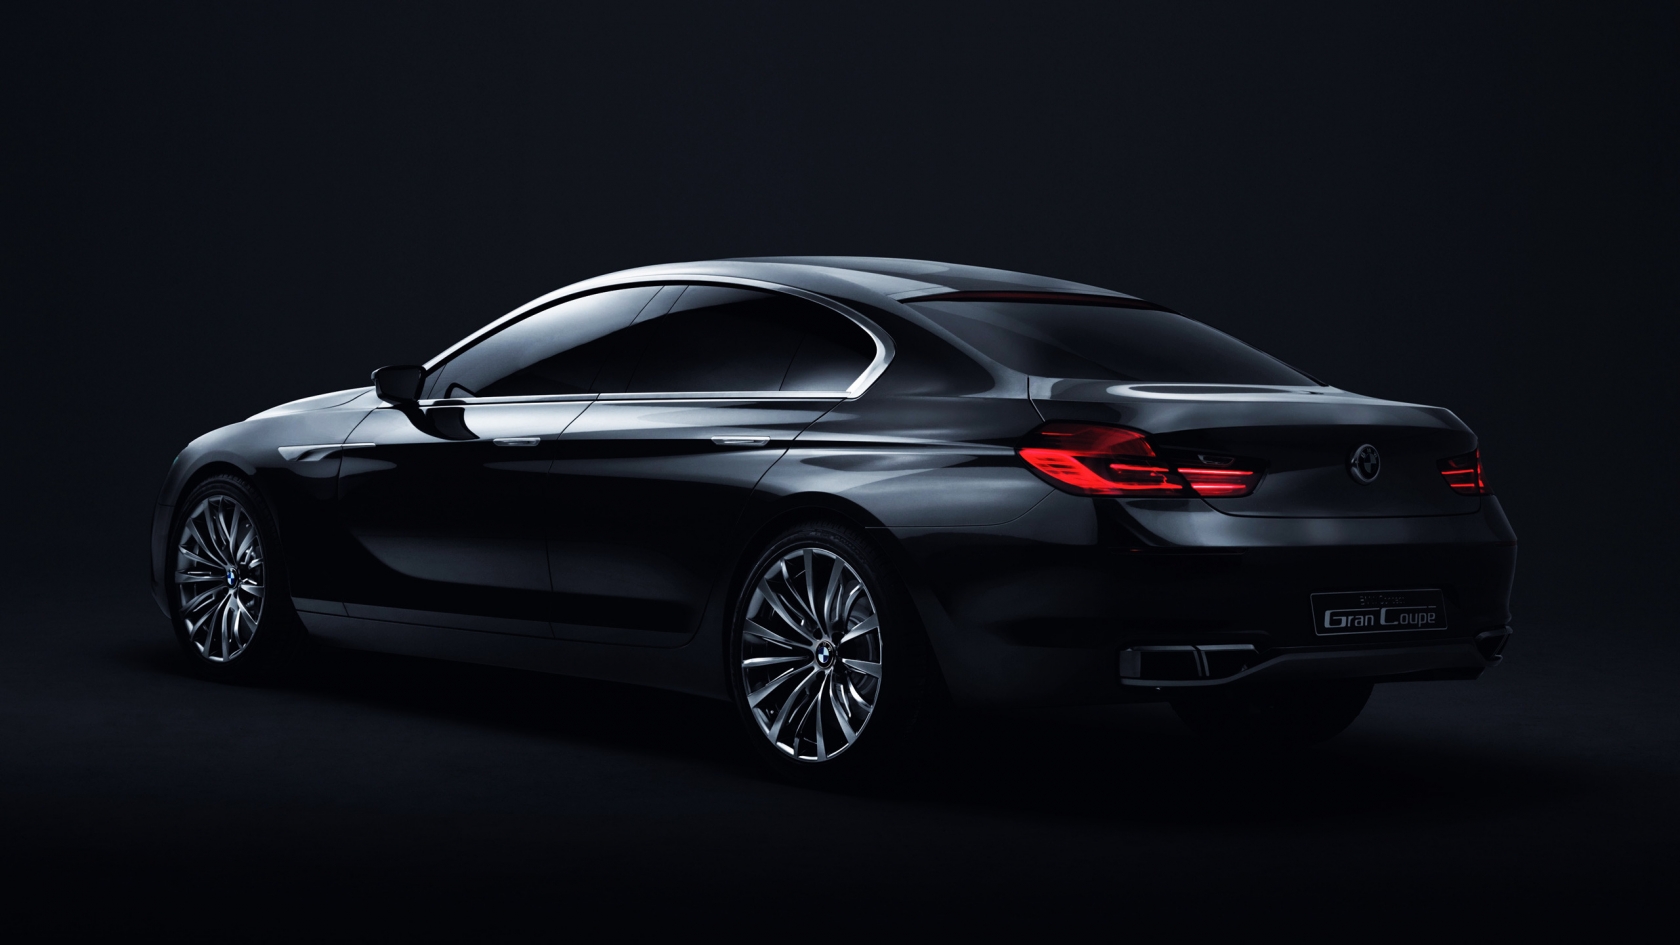 BMW Gran Coupe Rear for 1680 x 945 HDTV resolution